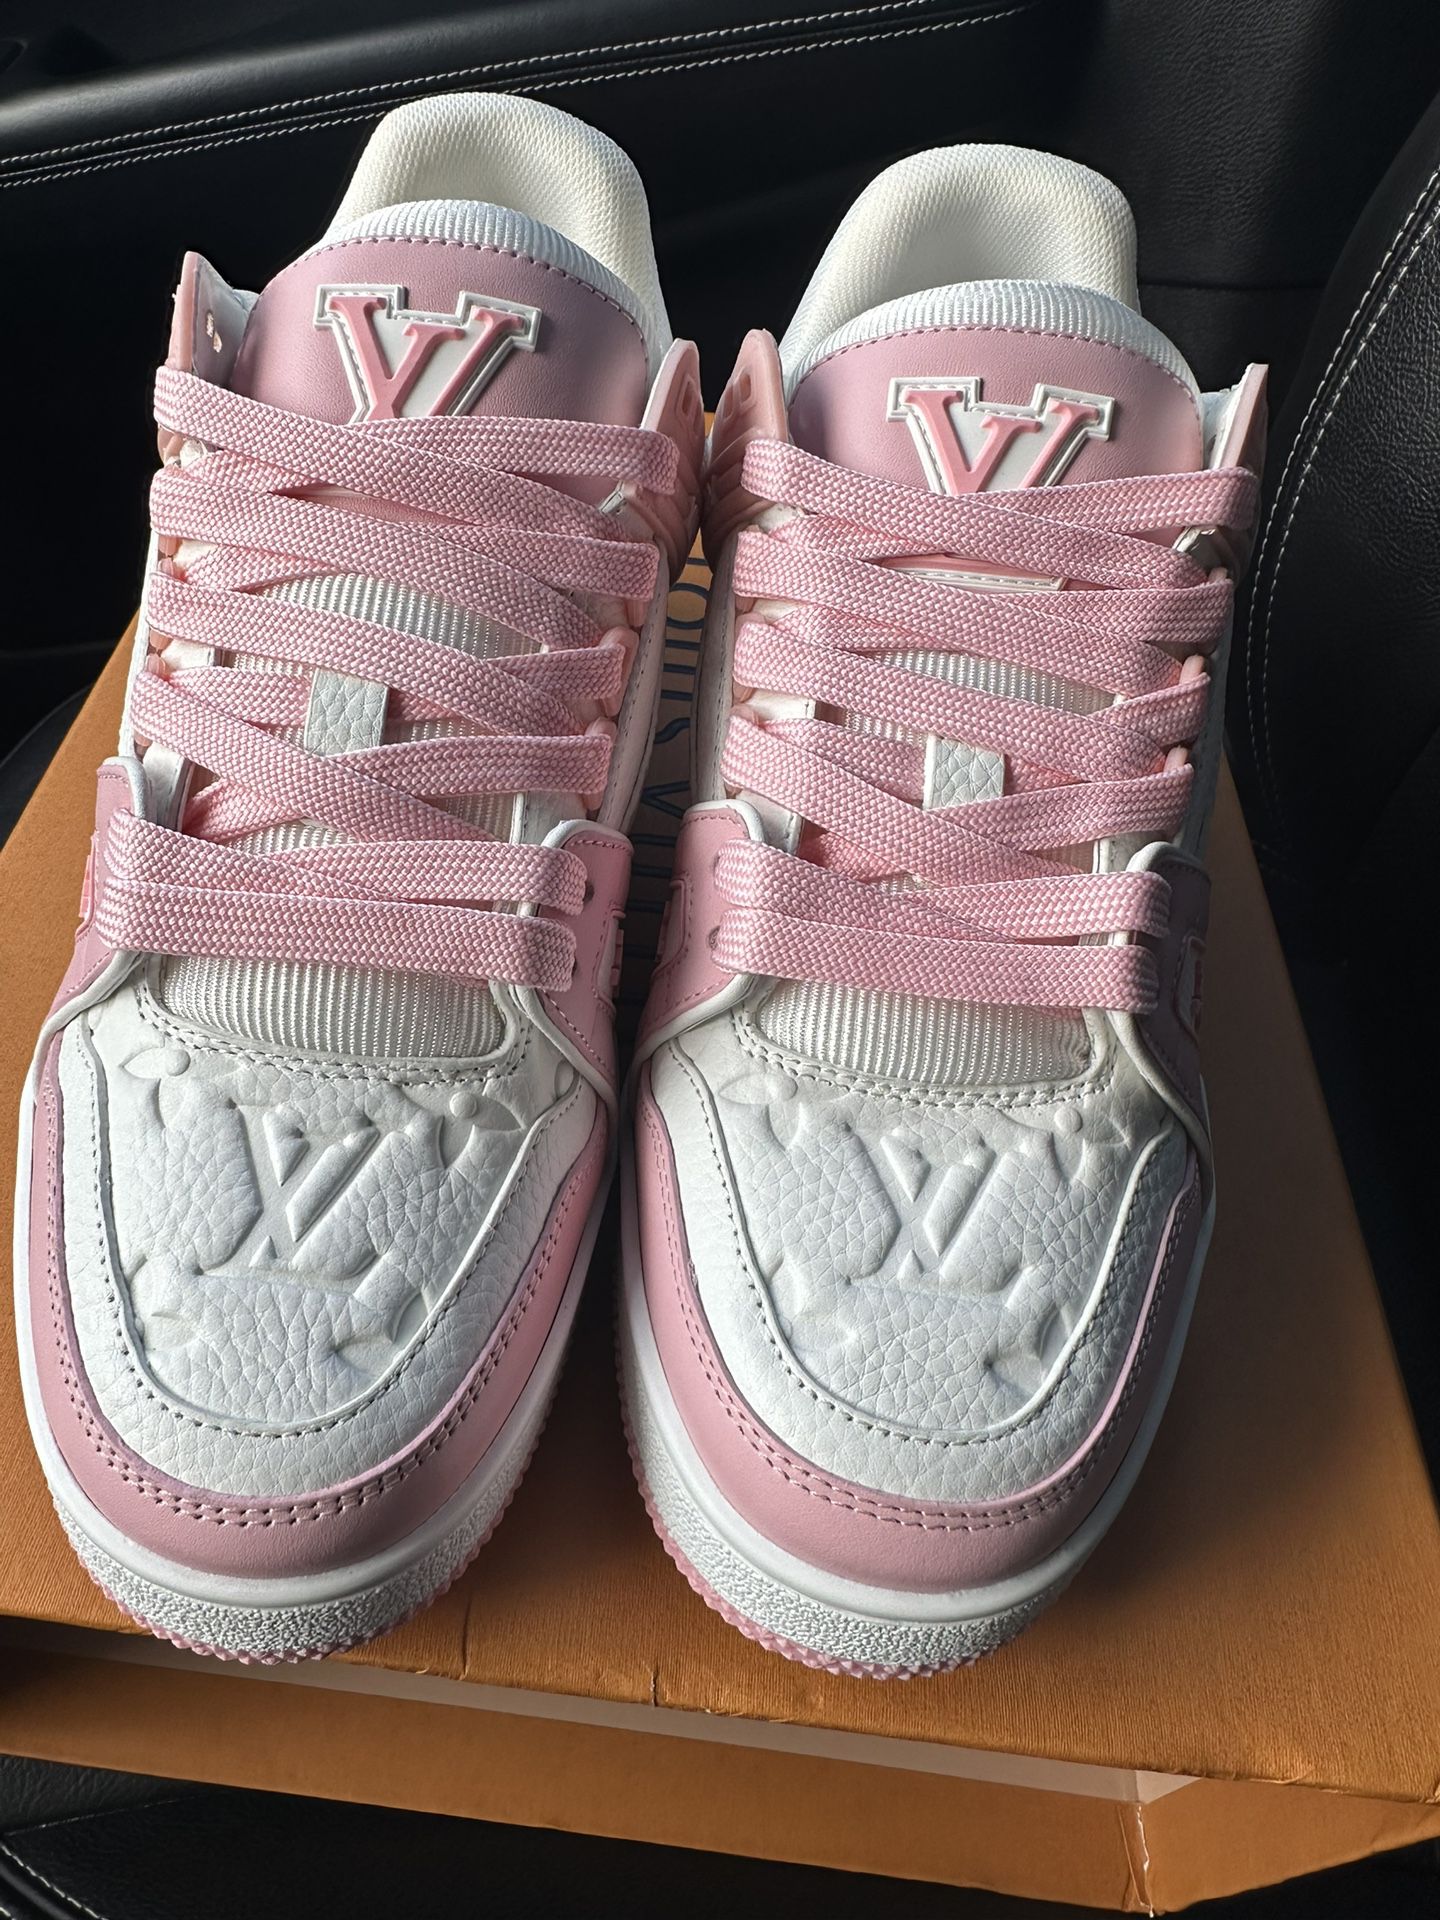 Pink Rose Louis Vuitton Trainers for Sale in West Hollywood, CA - OfferUp